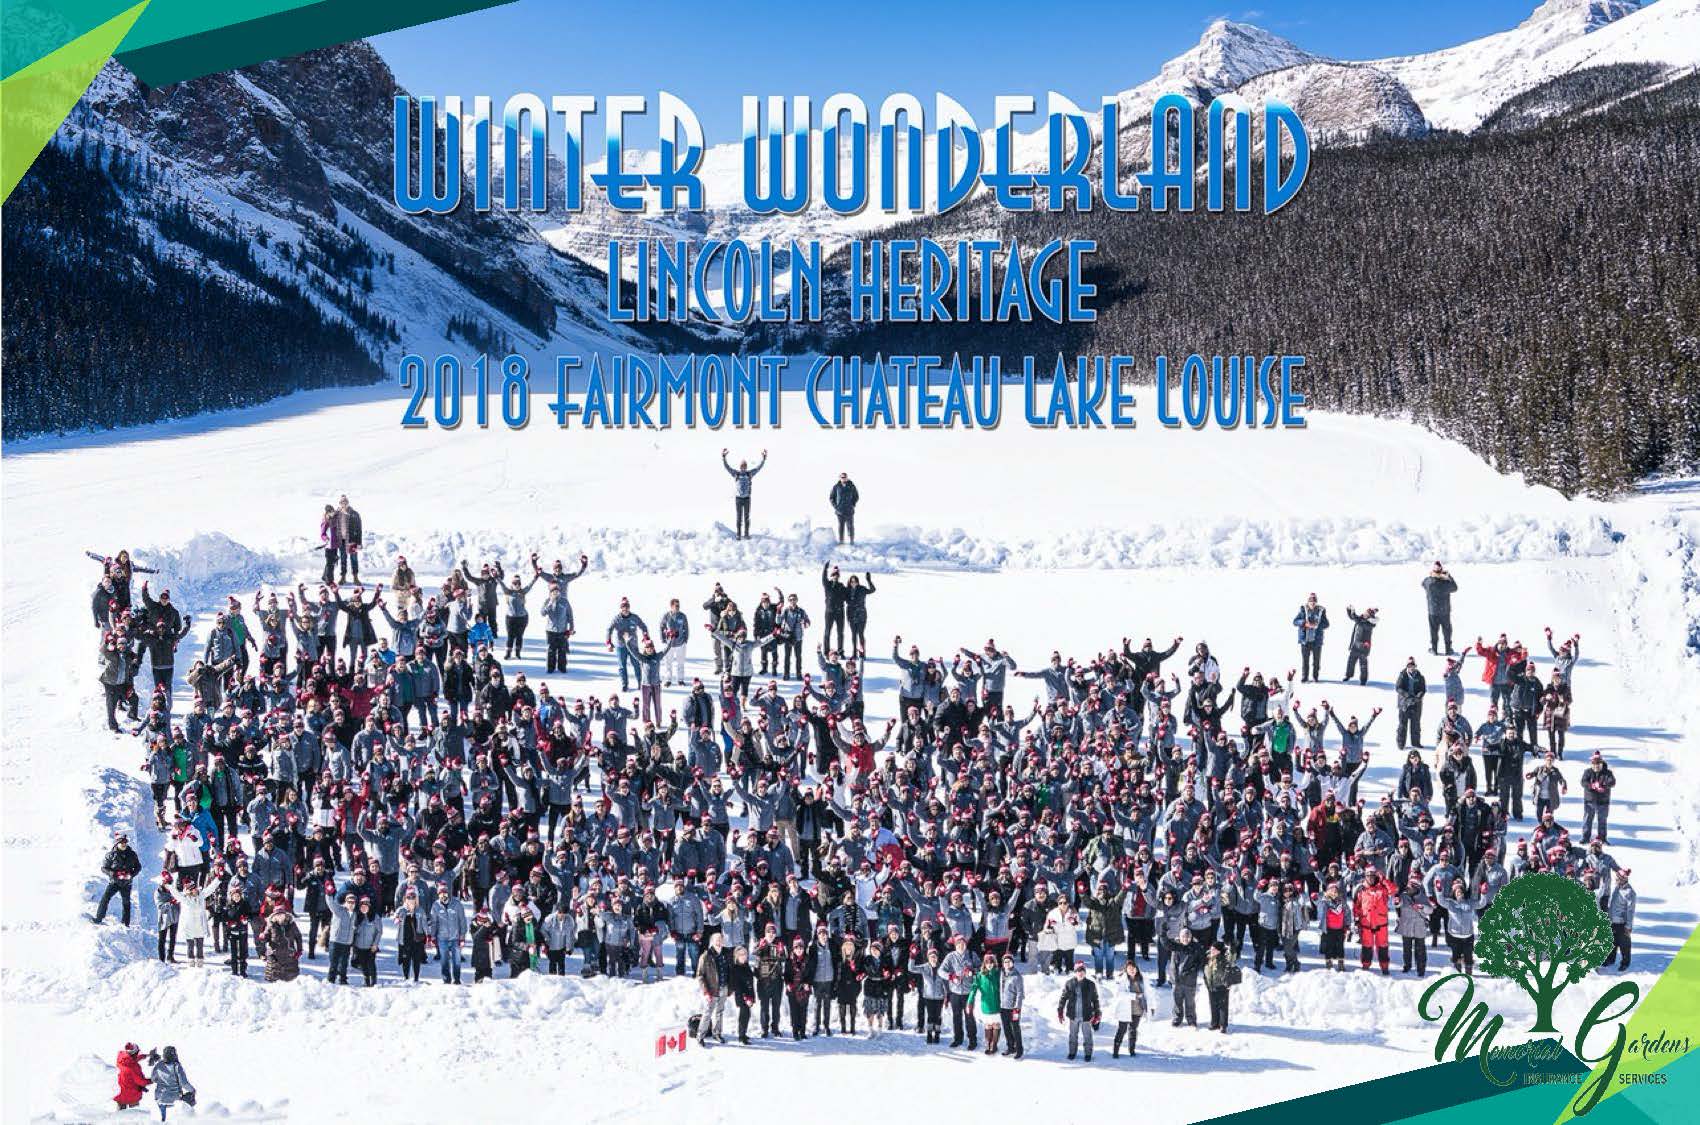 A large group of people standing on top of a snow covered slope.